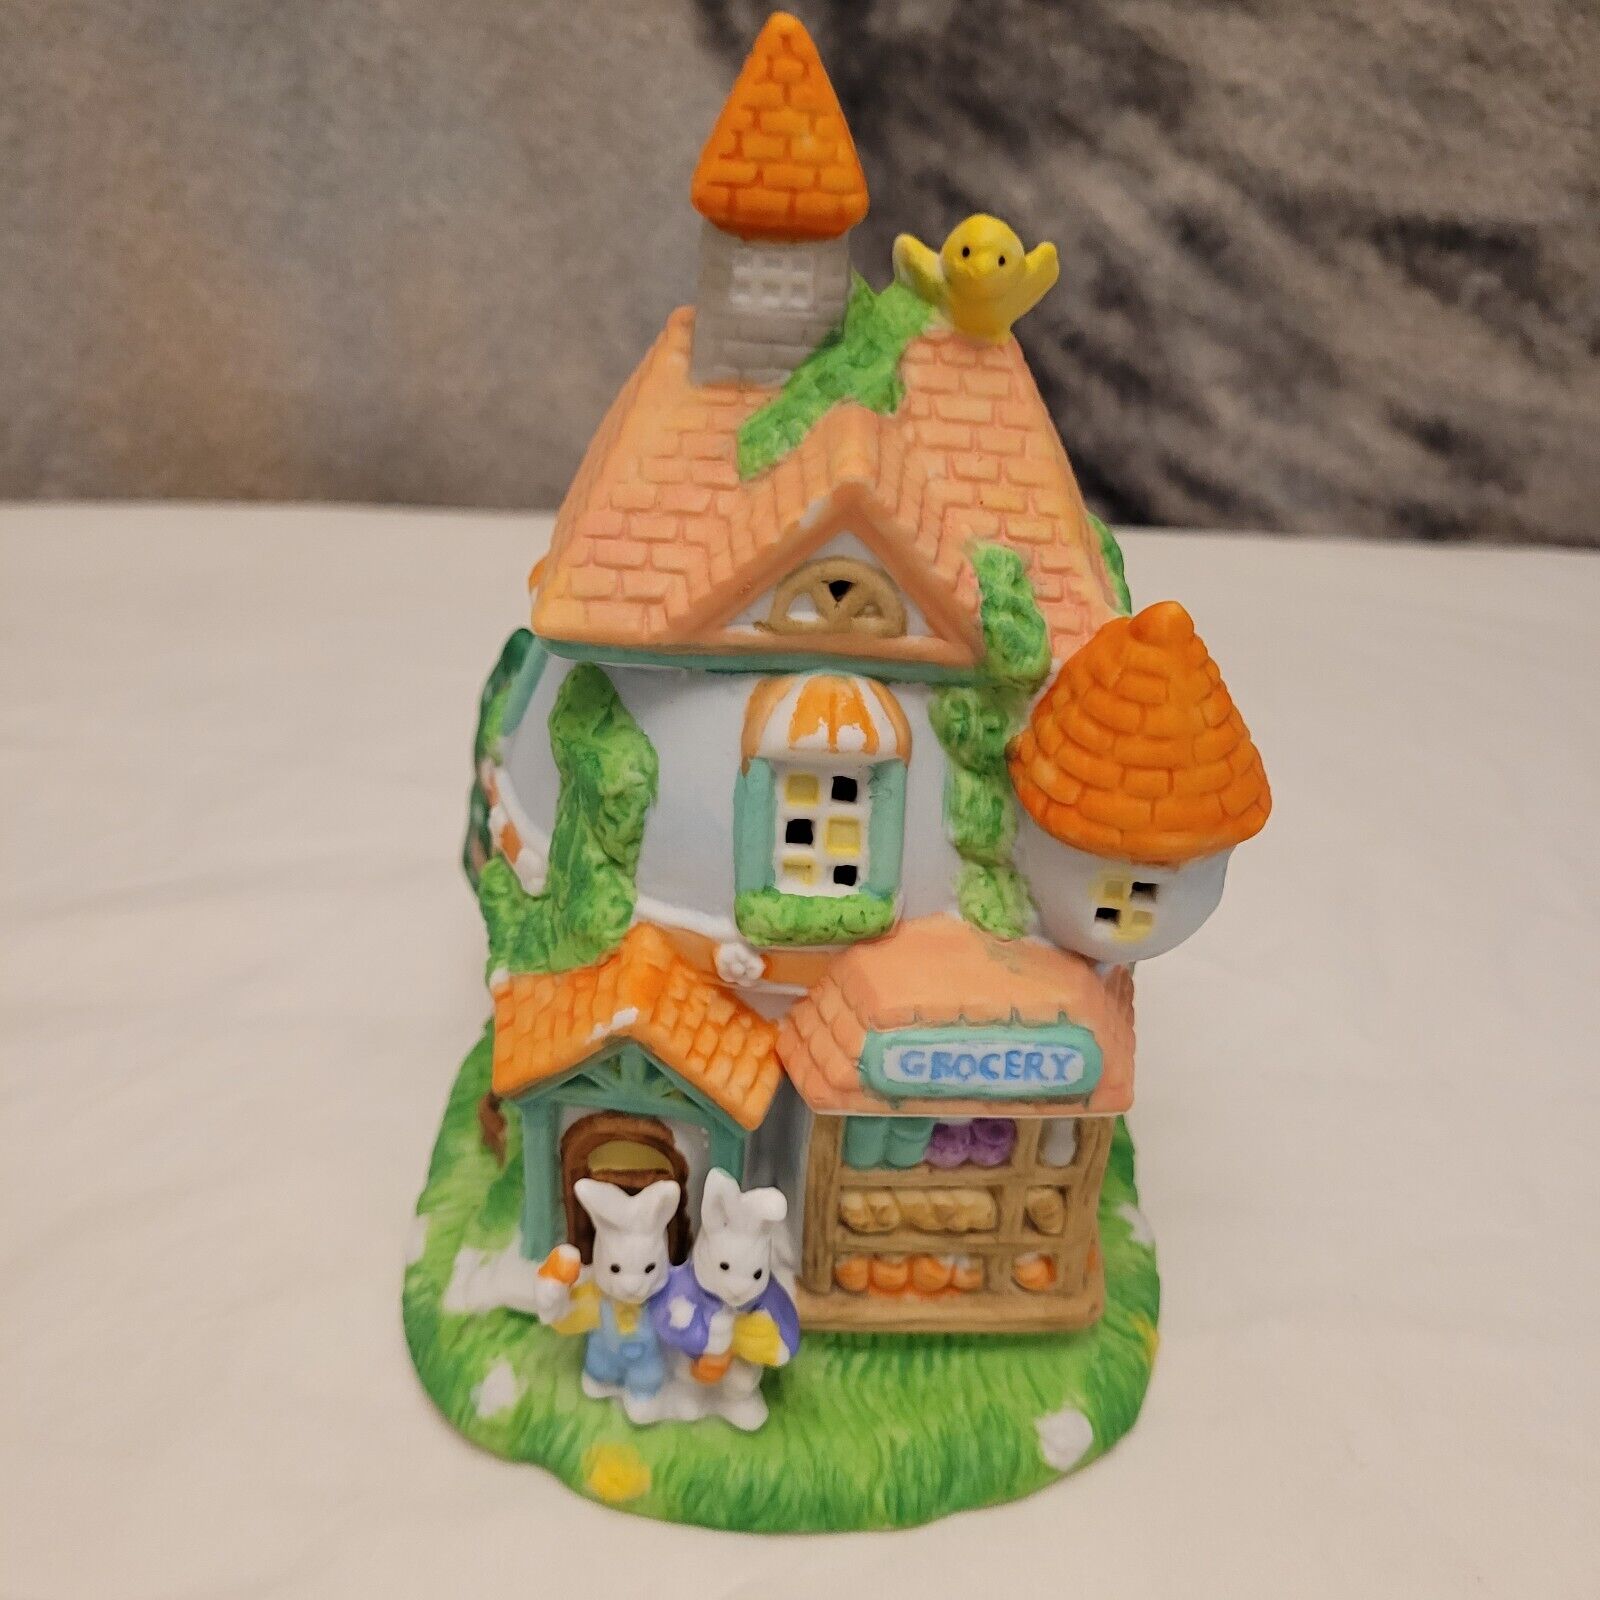 Cottontale Cottages Easter Hand Painted Porcelain Grocery Store House Village